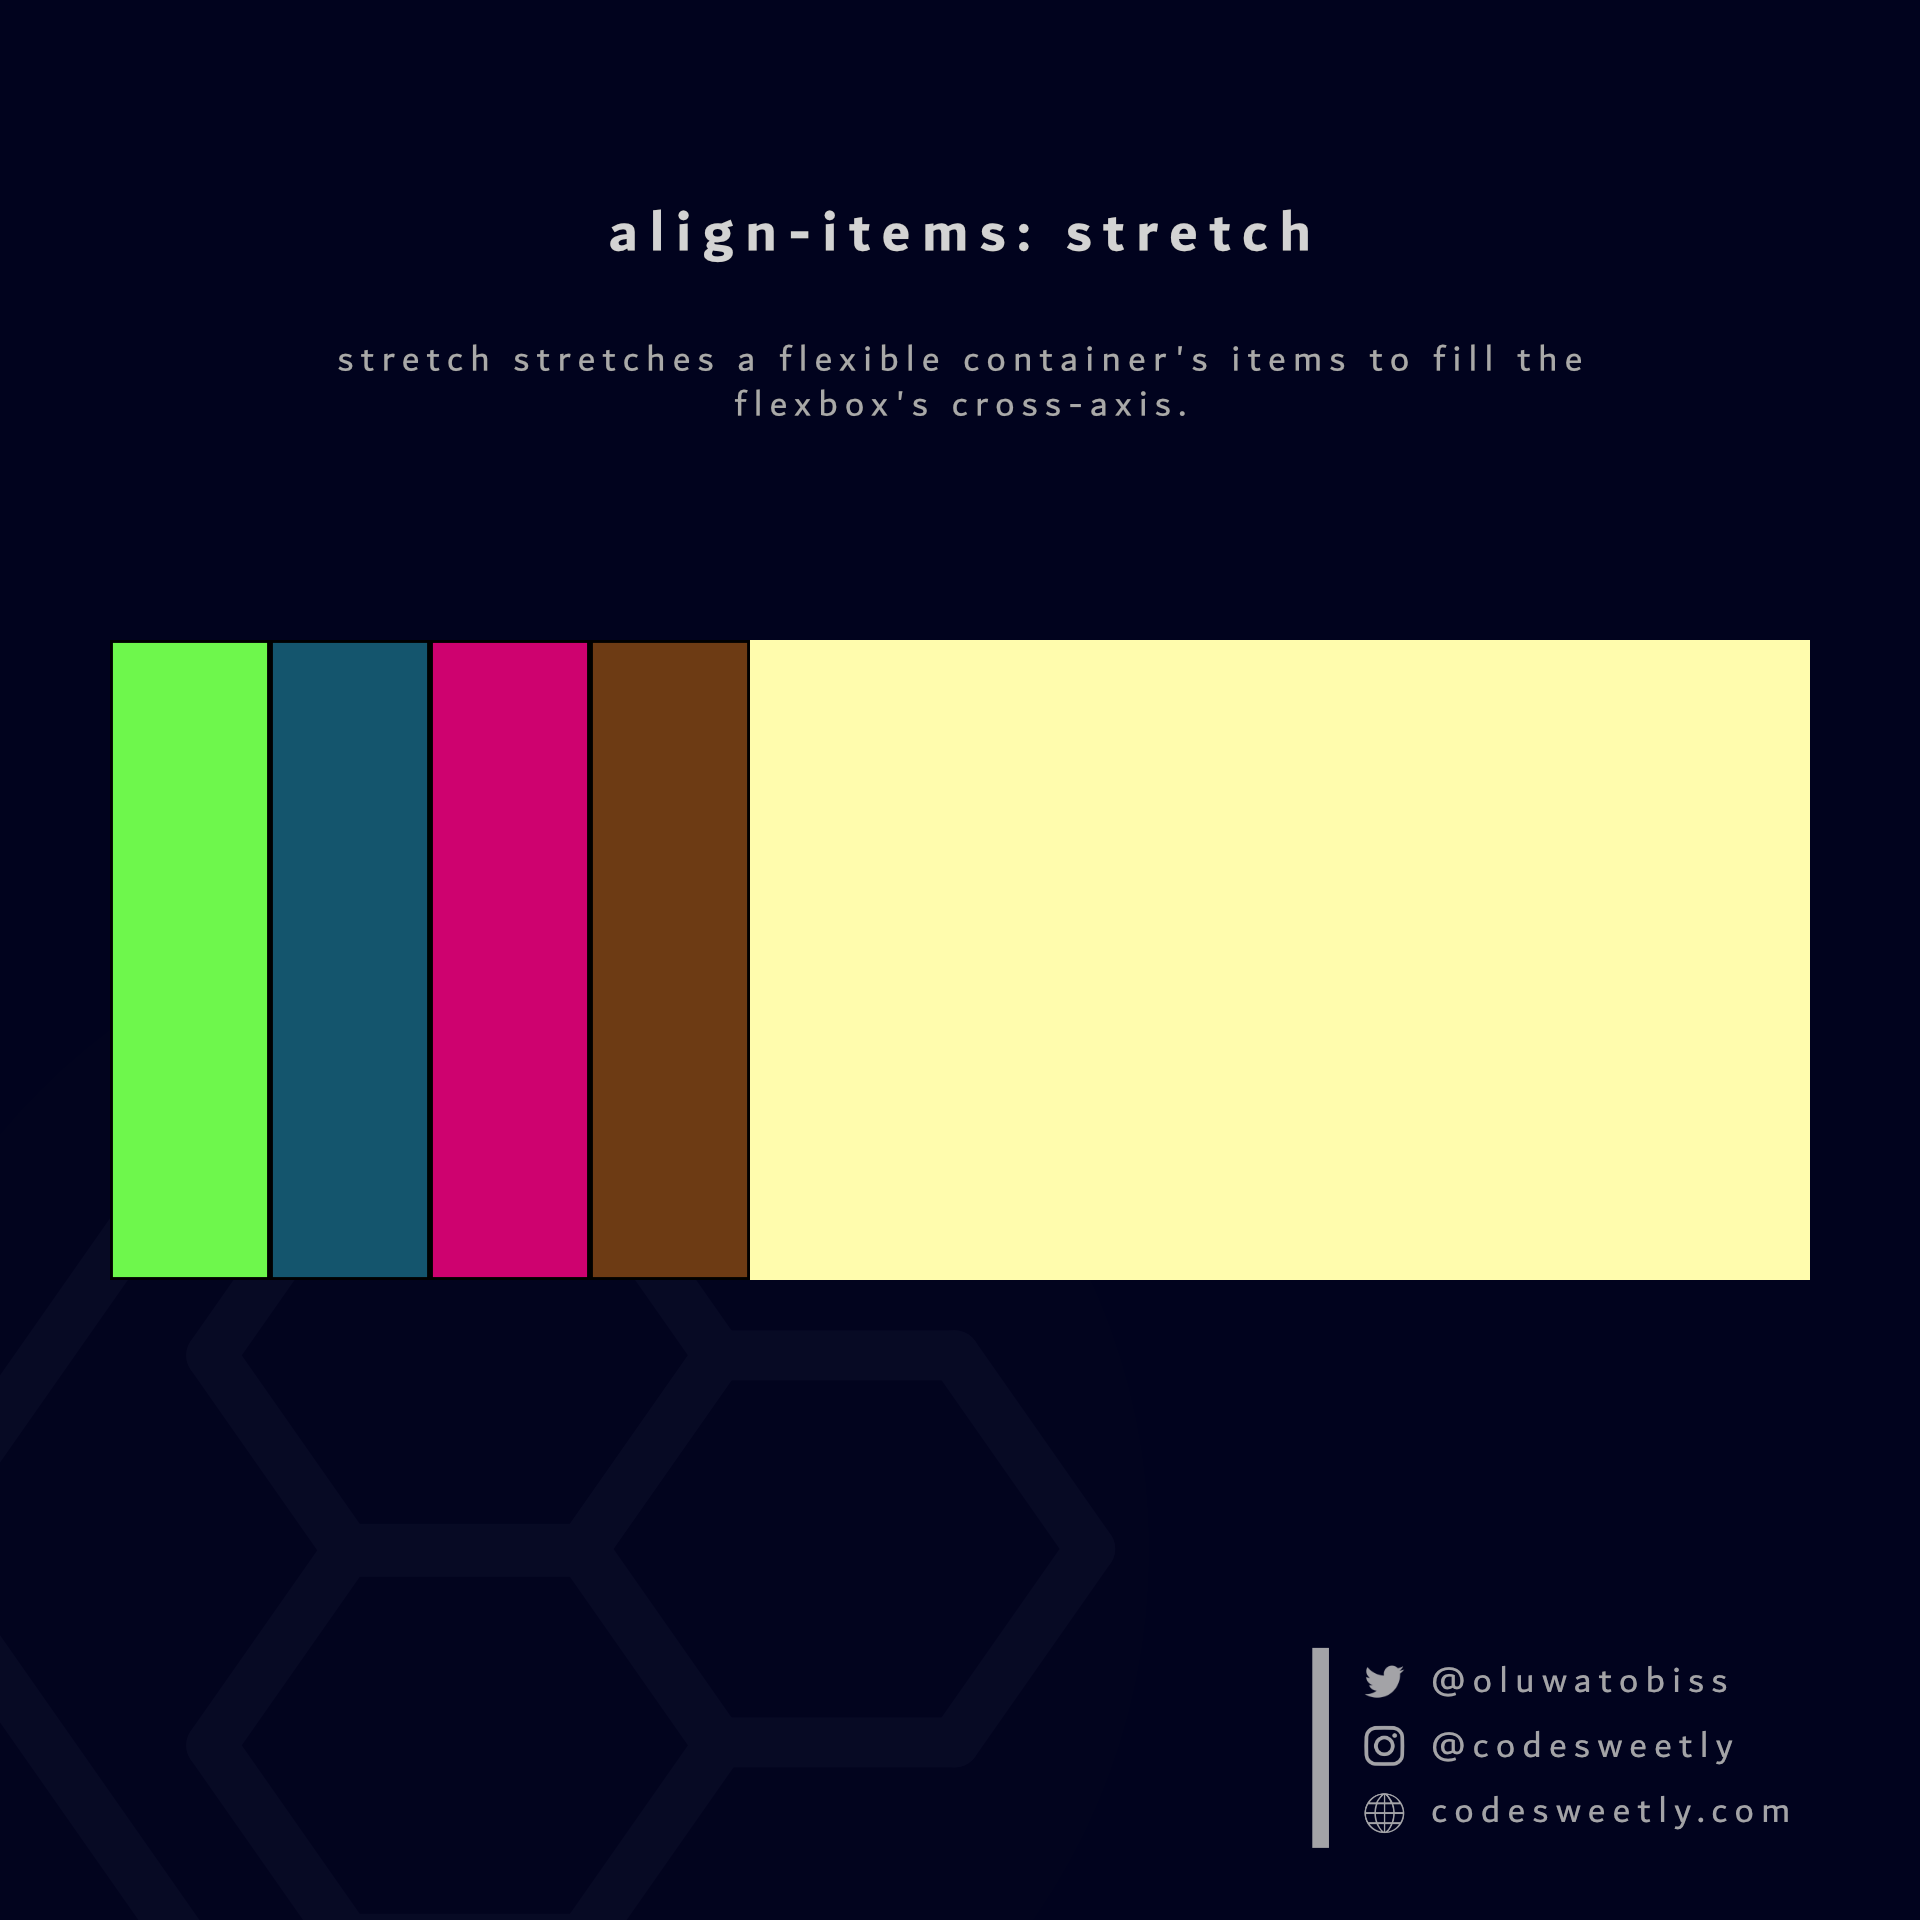 align-items' stretch value stretches flexible items to fill the flexbox's cross-axis